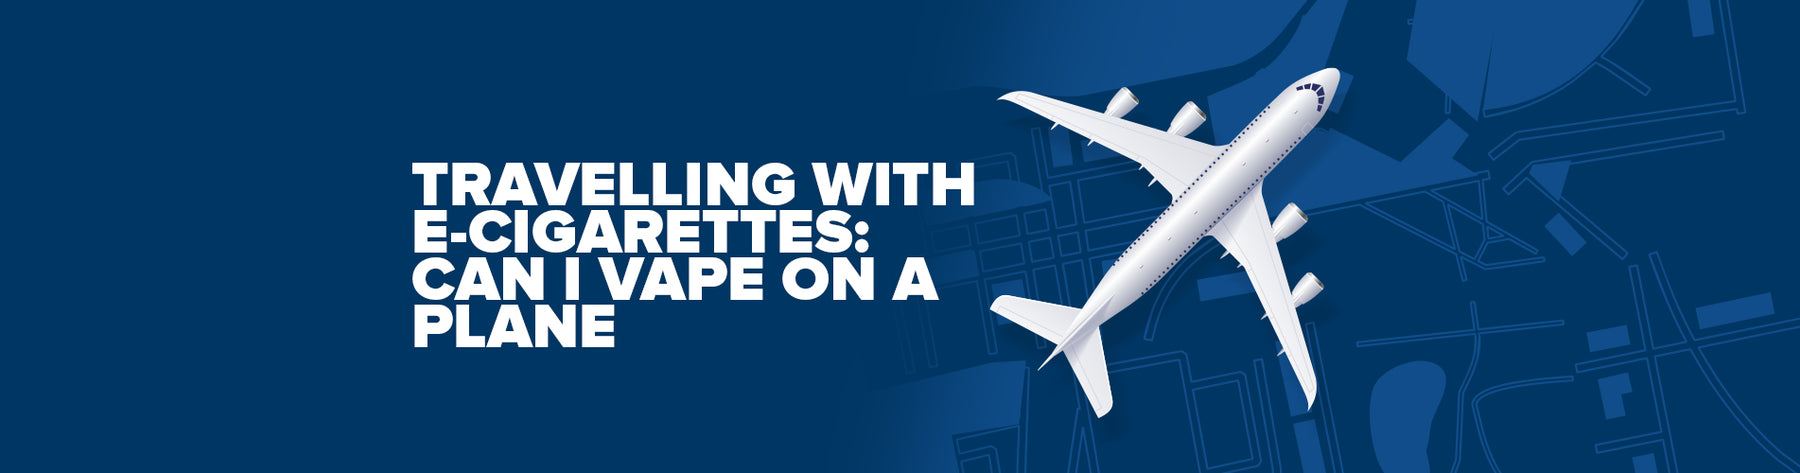 Travelling With E-cigarettes: Can I Vape On A Plane?